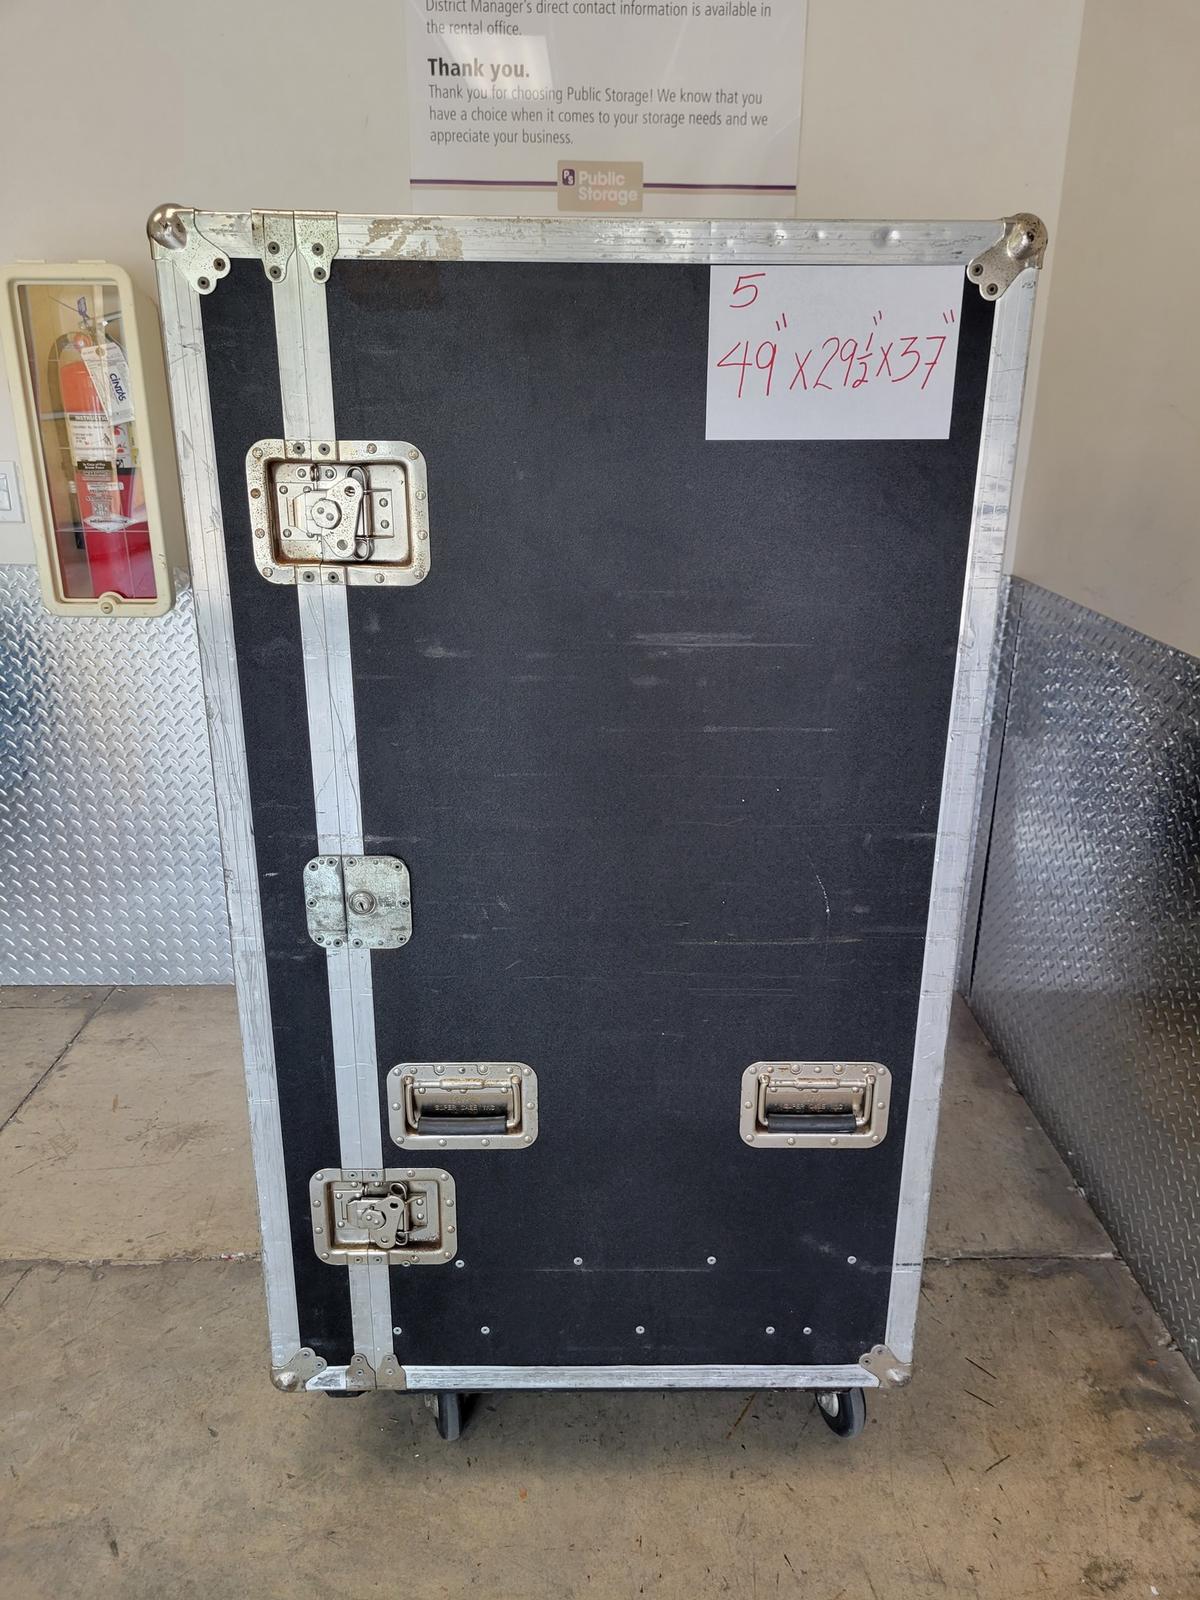 Road Case 49"x 29" x 37" Rolling Sound Event